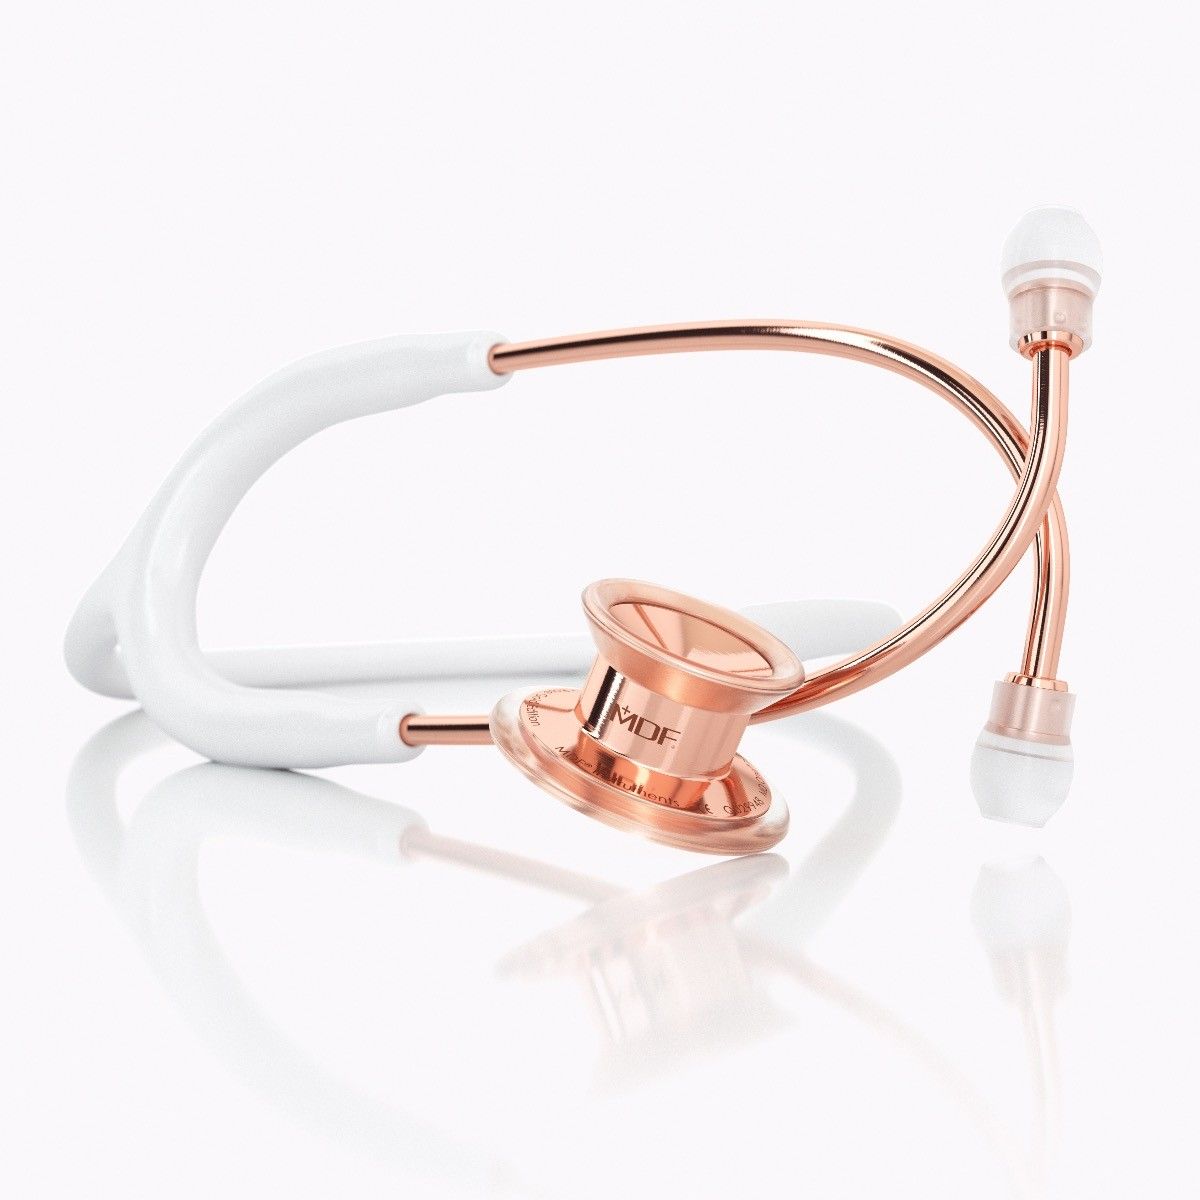 products-pediatric-rose-gold-and-white-md-one-stethoscope-1_1-417621-jpg